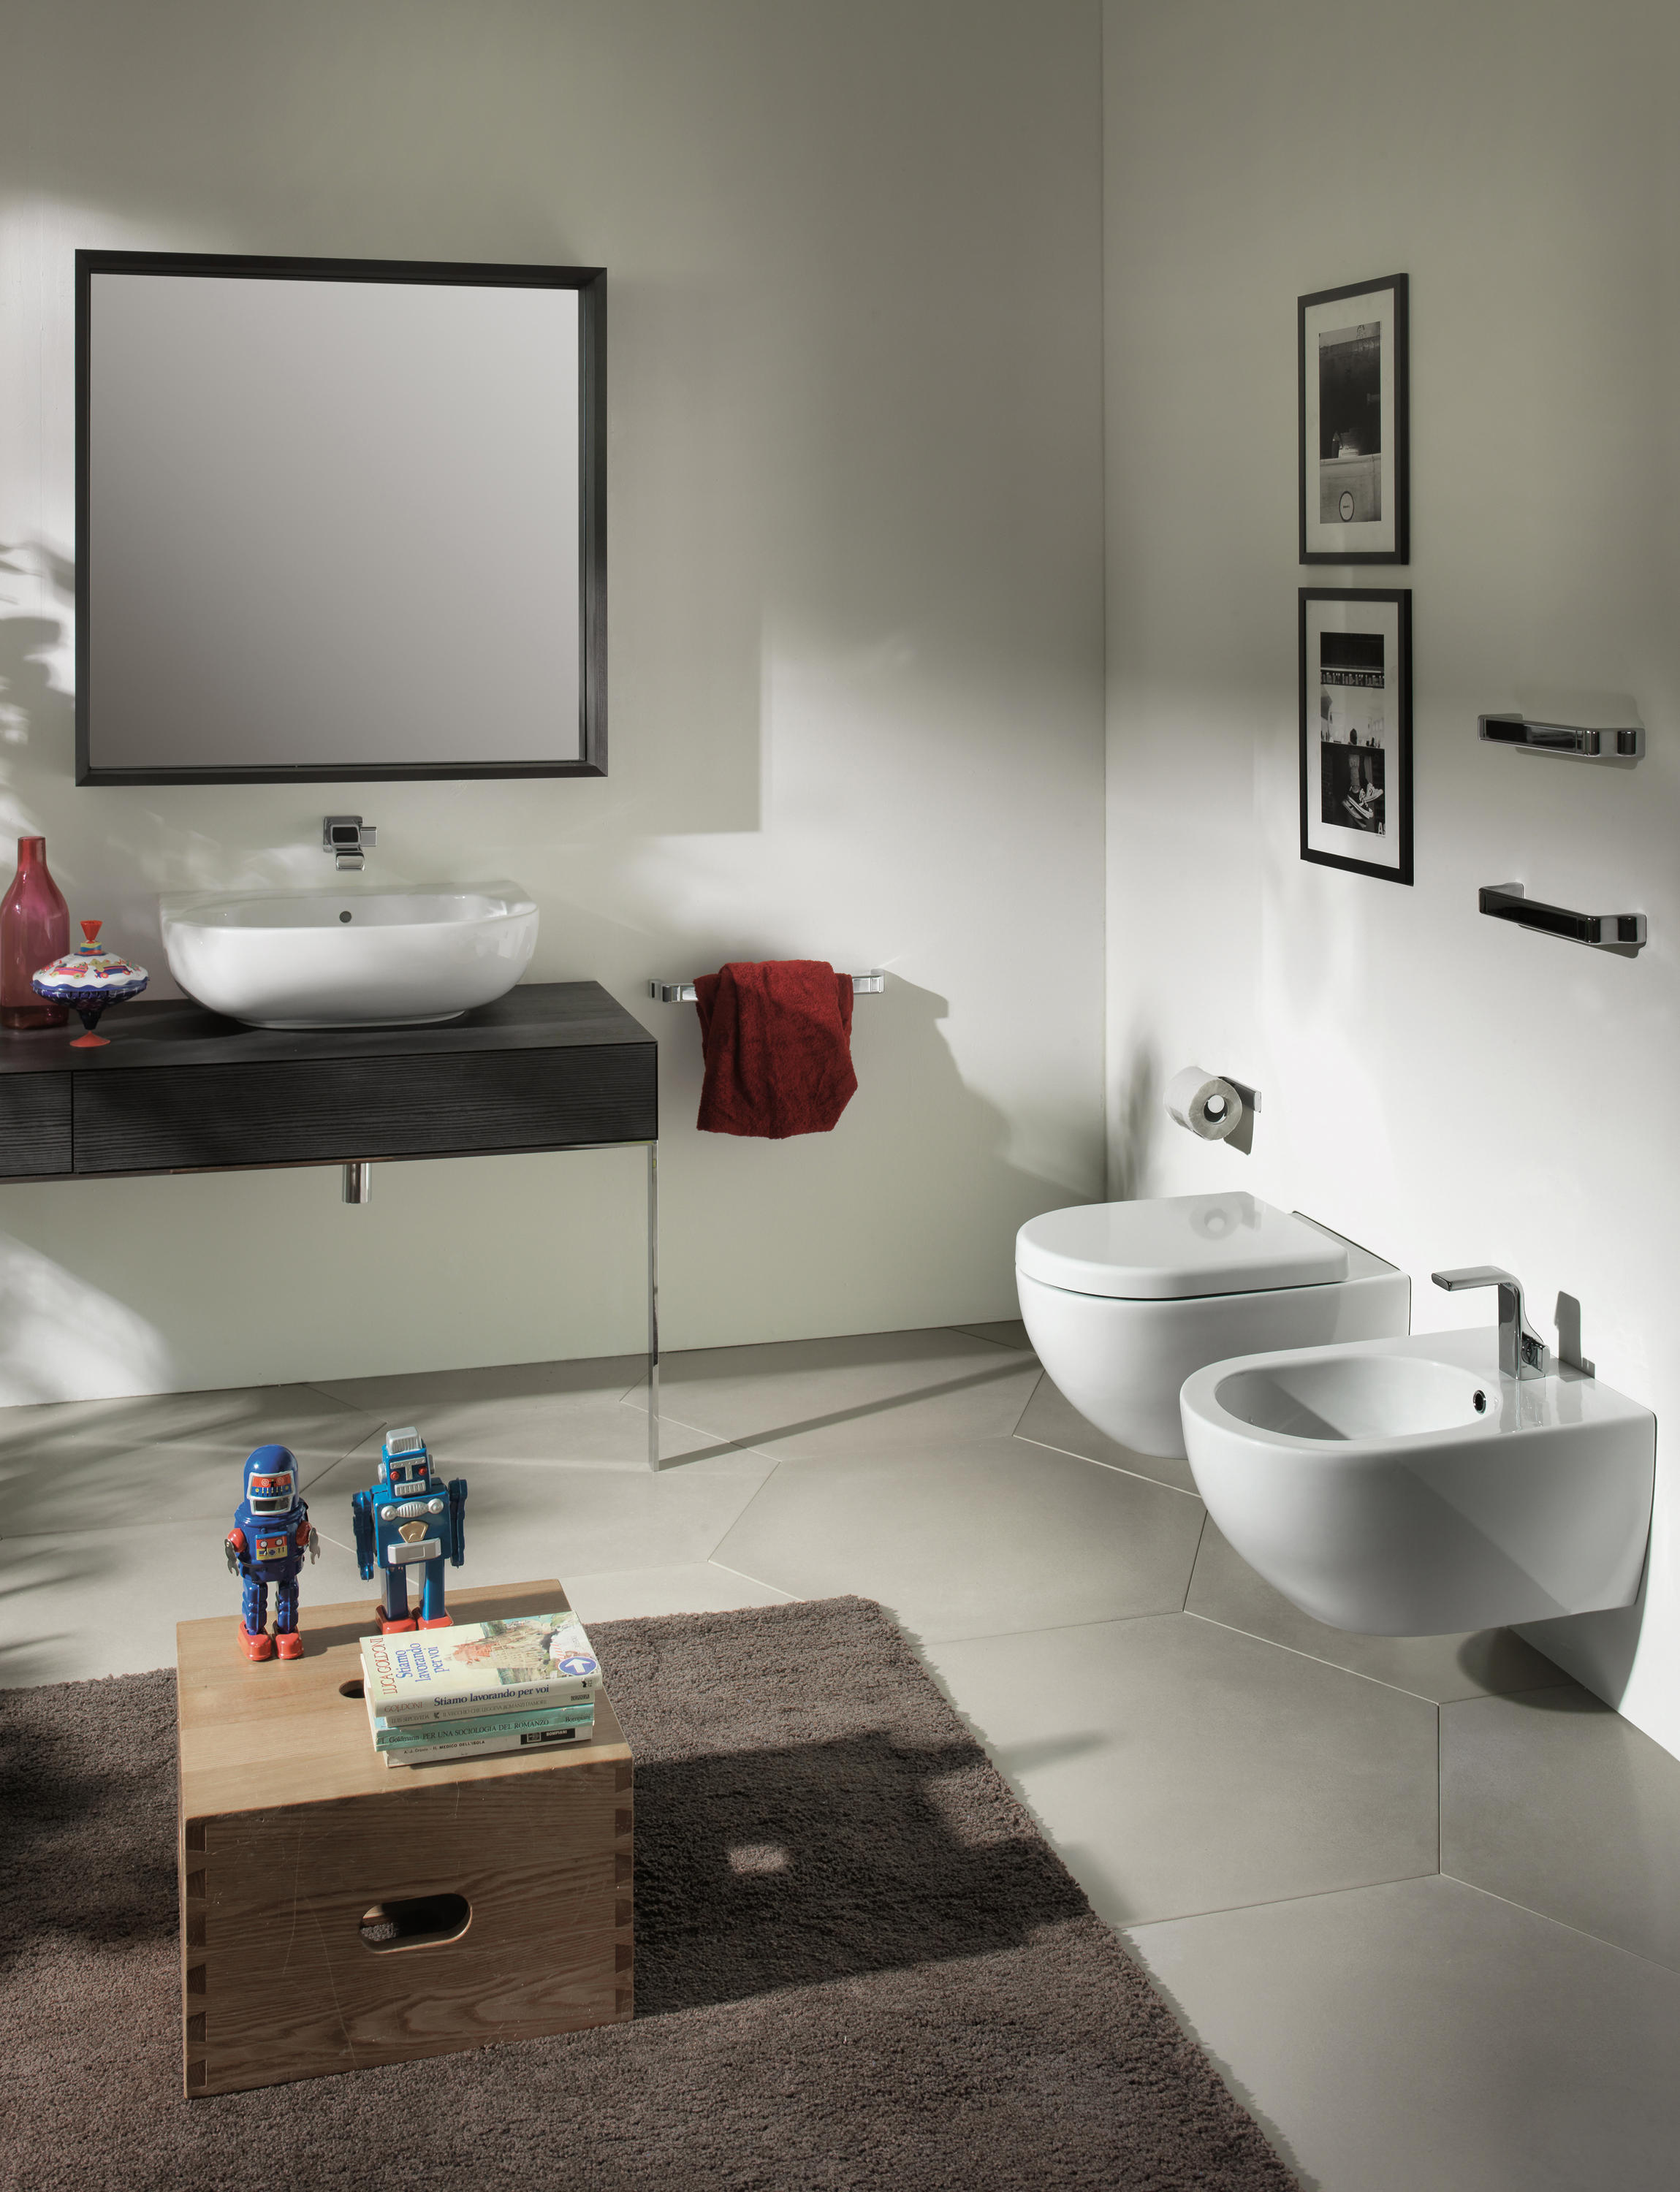 Ceramica Catalano - Today, the bathroom is becoming a living room